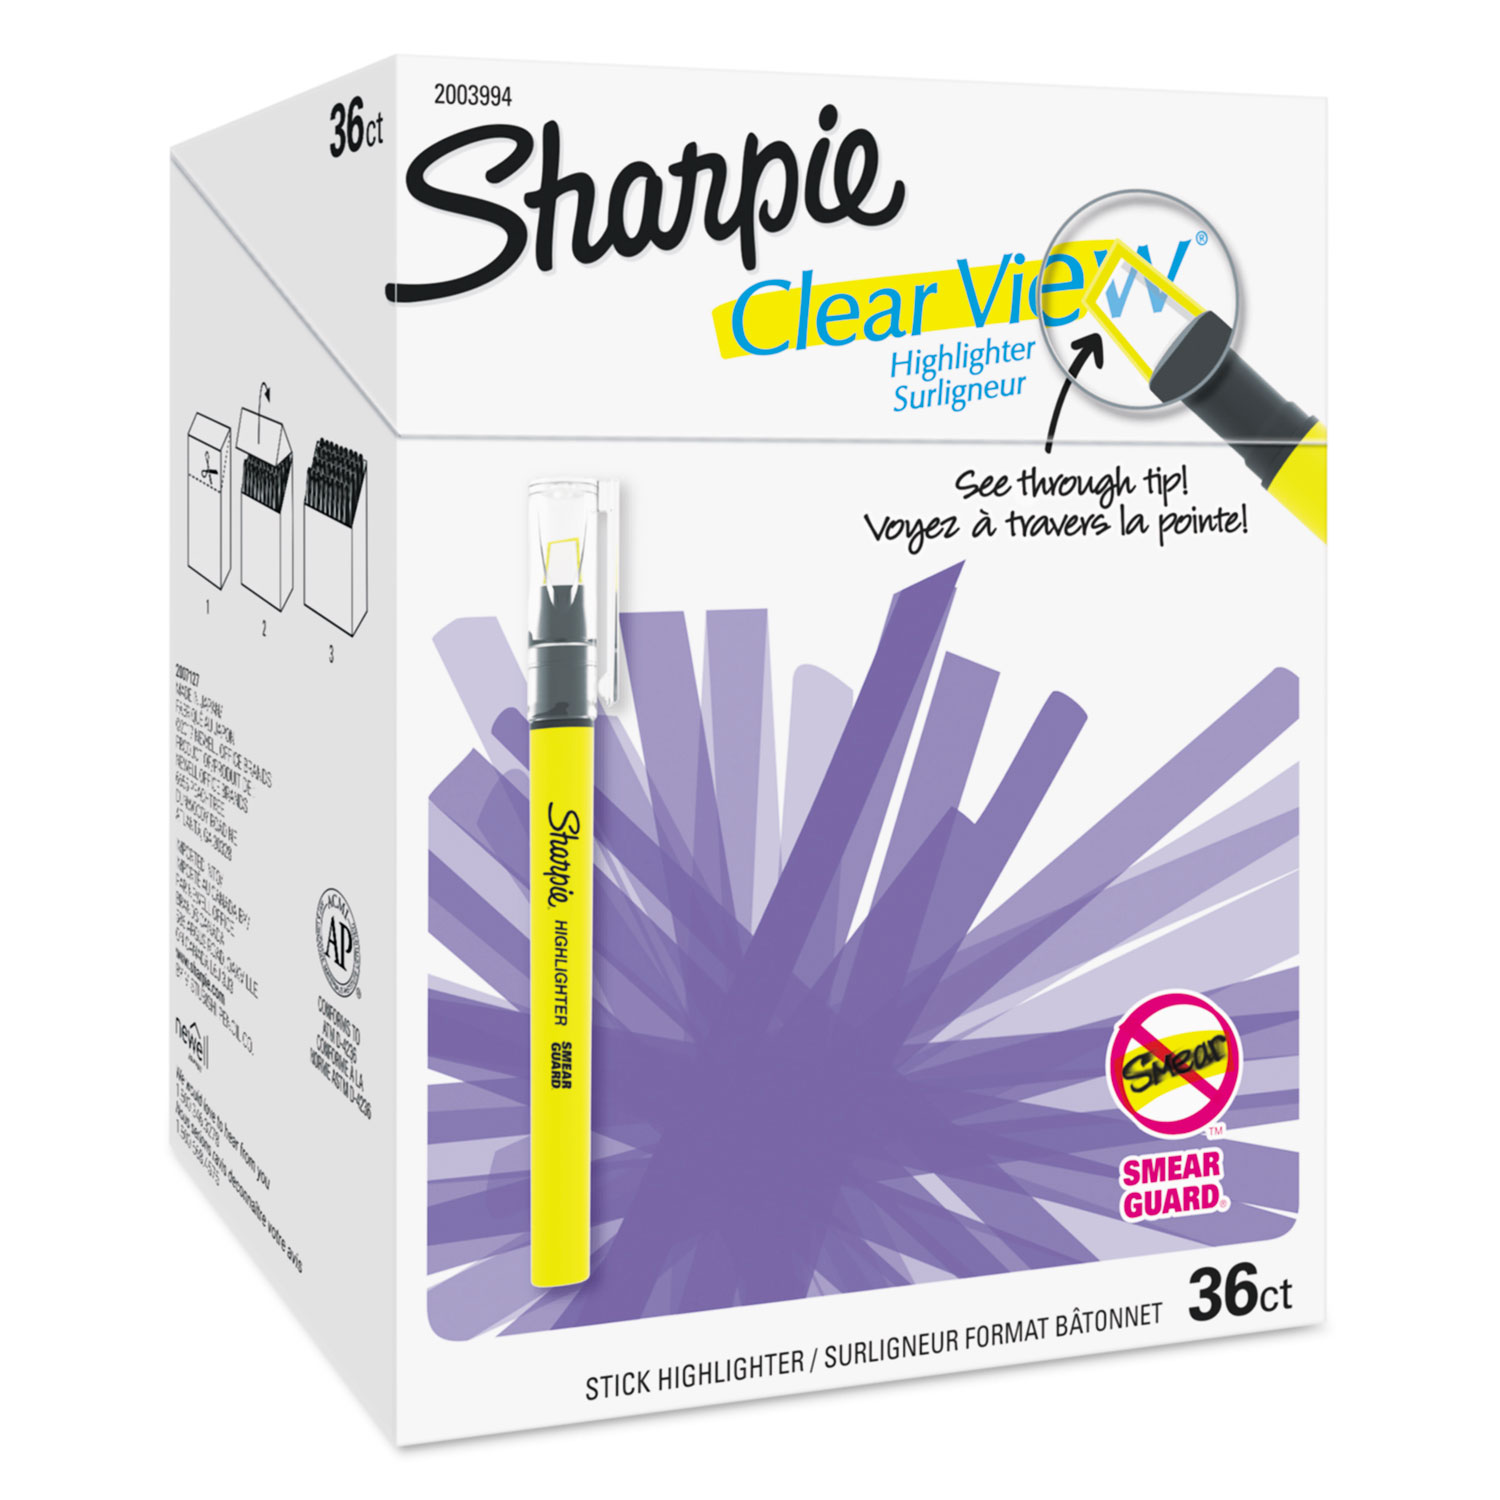  Sharpie 2003994 Clearview Pen-Style Highlighter, Chisel Tip, Assorted Colors, 36/Pack (SAN2003994) 